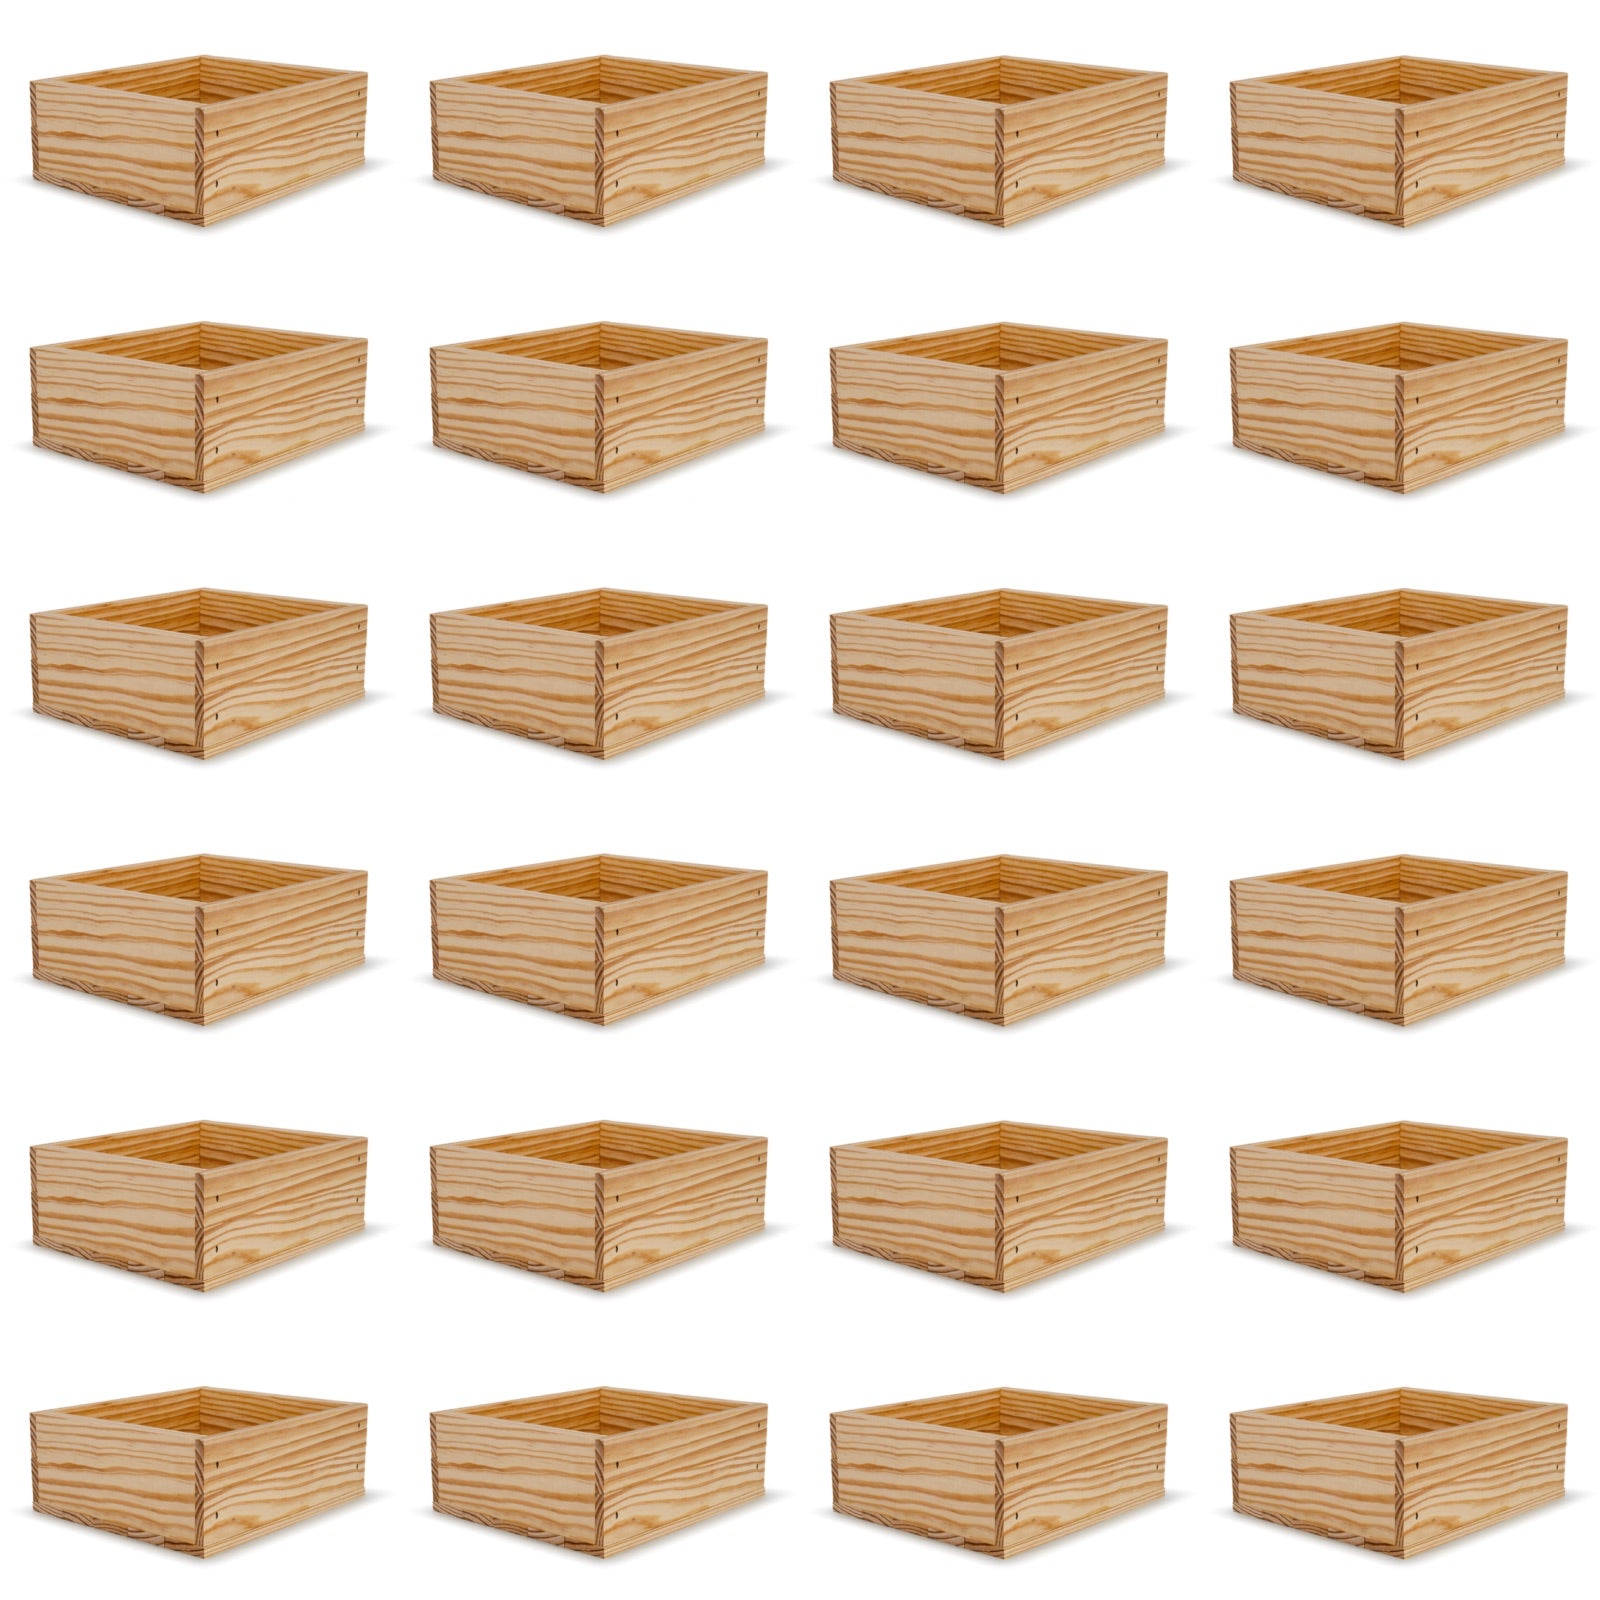 24 Small wooden crates 9x8x3.5